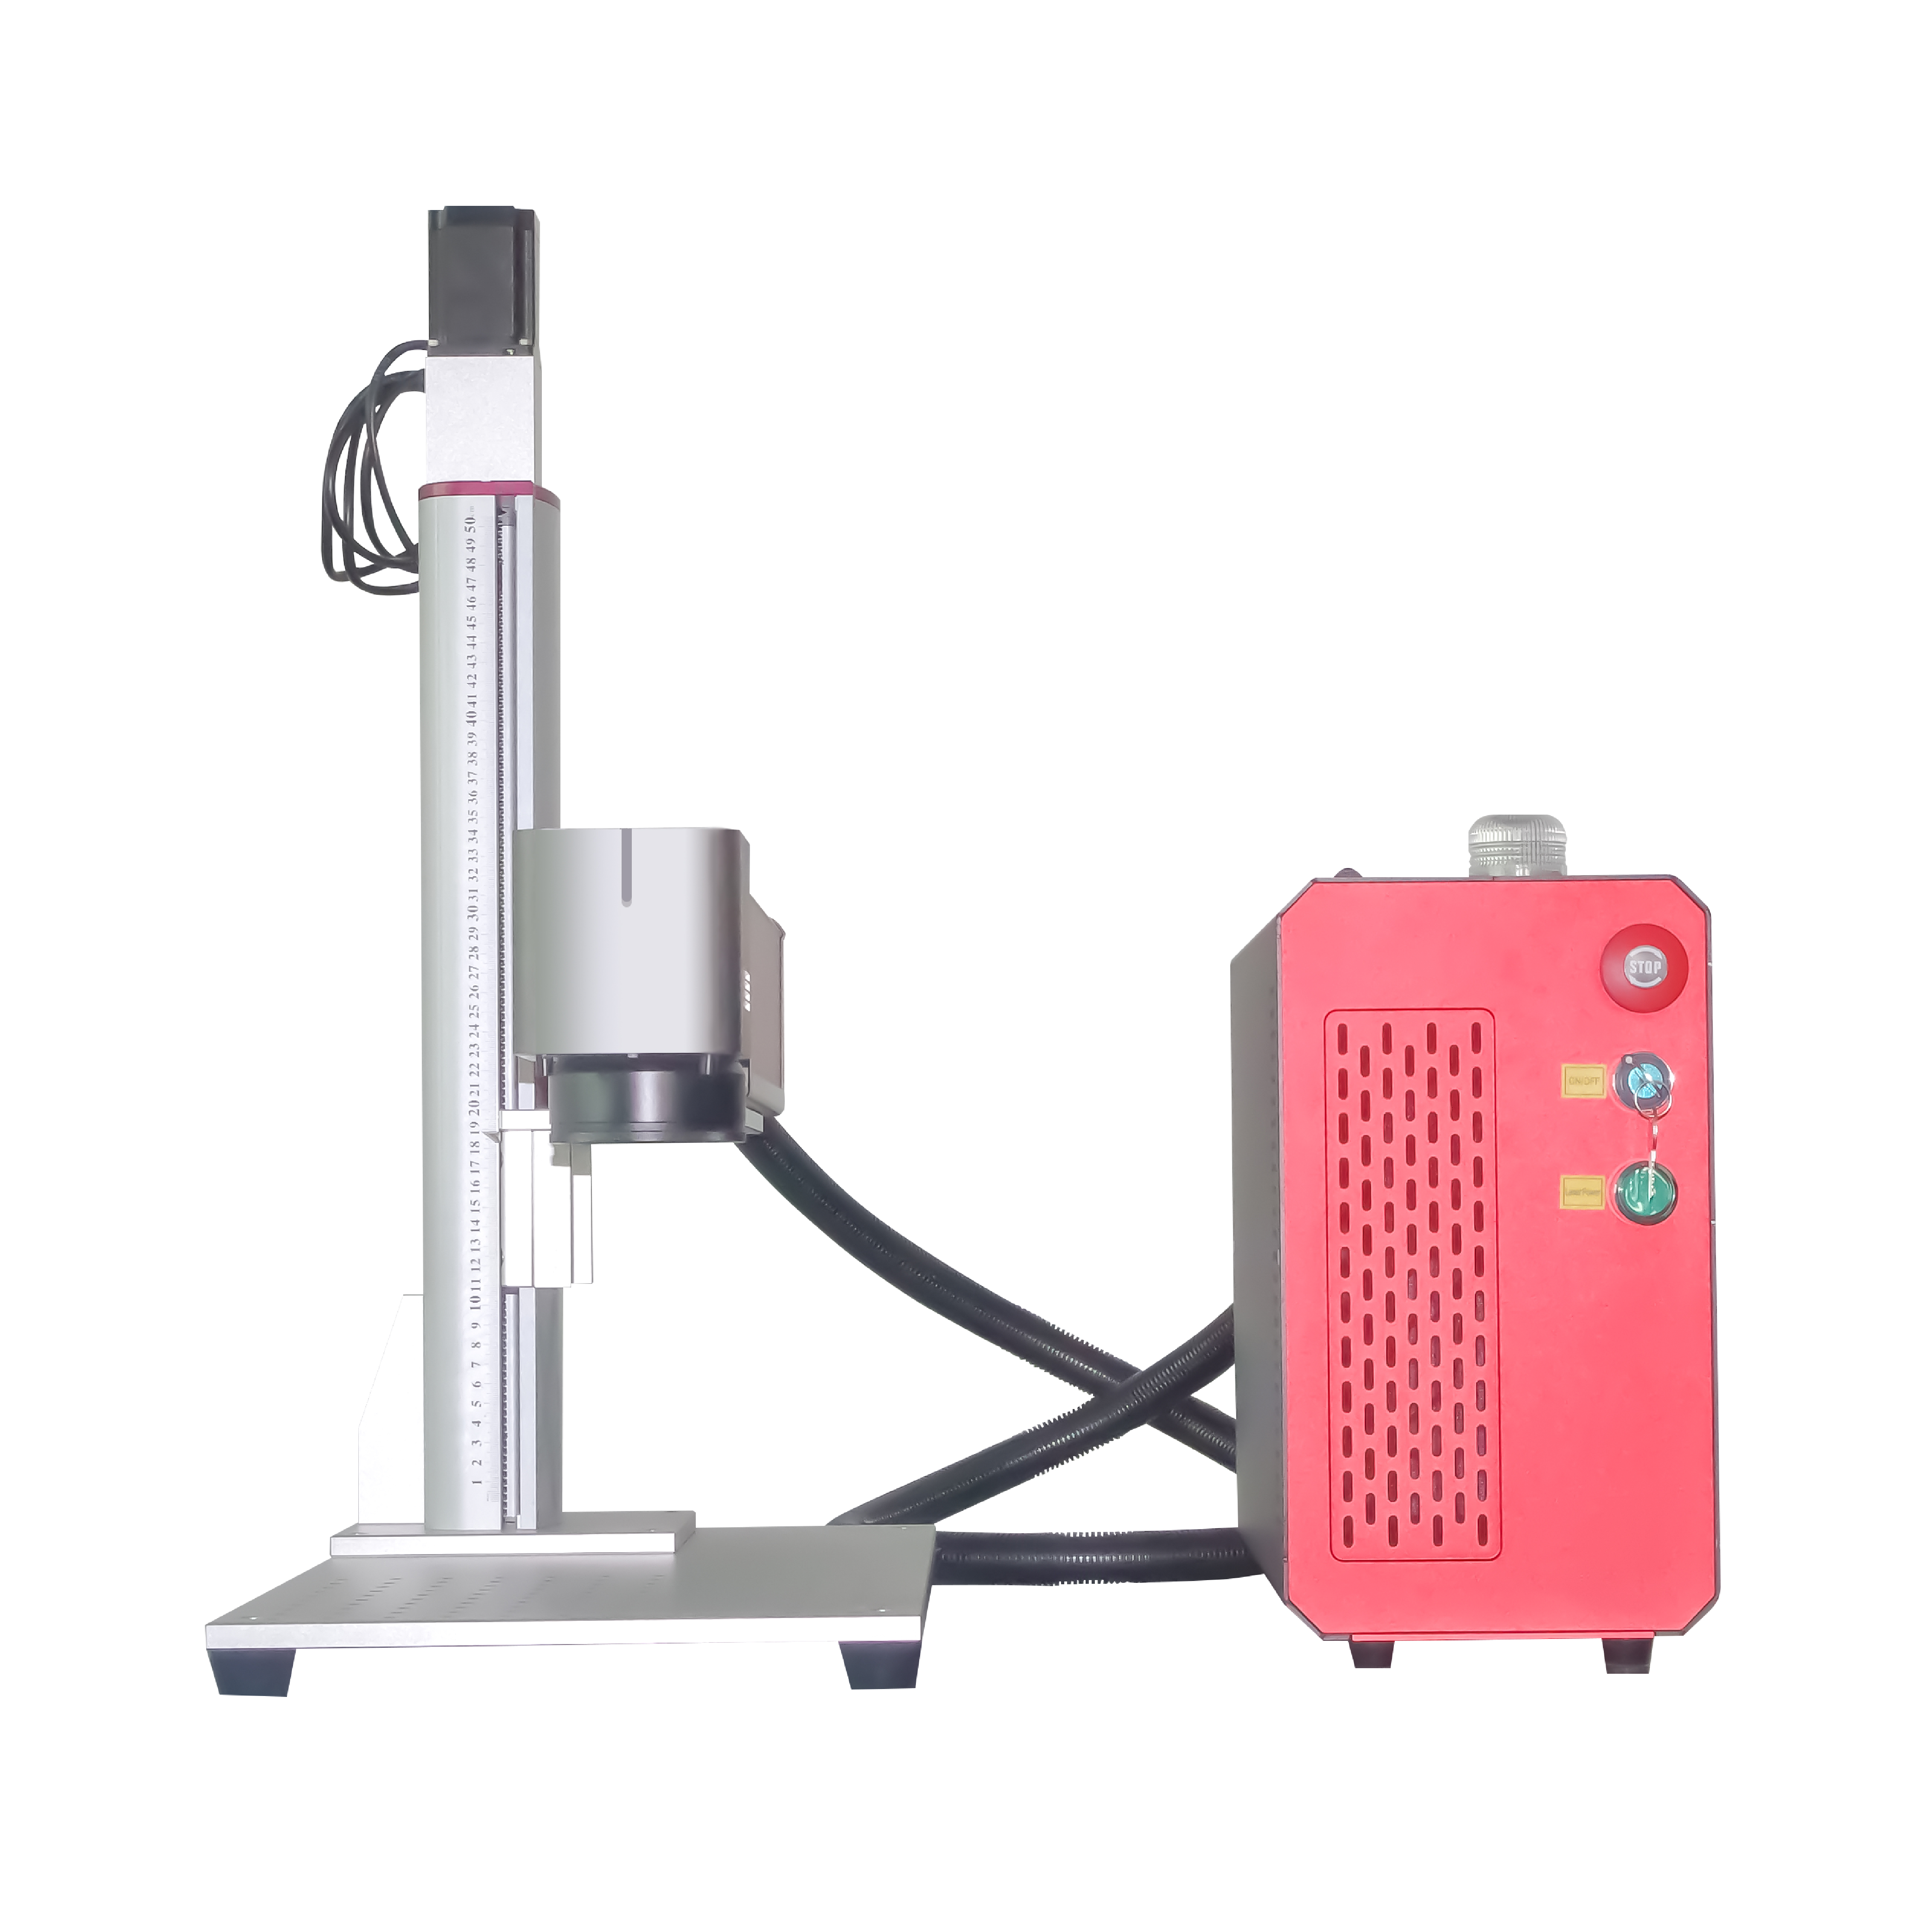 Good Price 20W 30W RAYCUS JPT Mopa Fiber Laser Marking Machine Metal Plastic Marker Engraver with Motorized Z Axis Controller